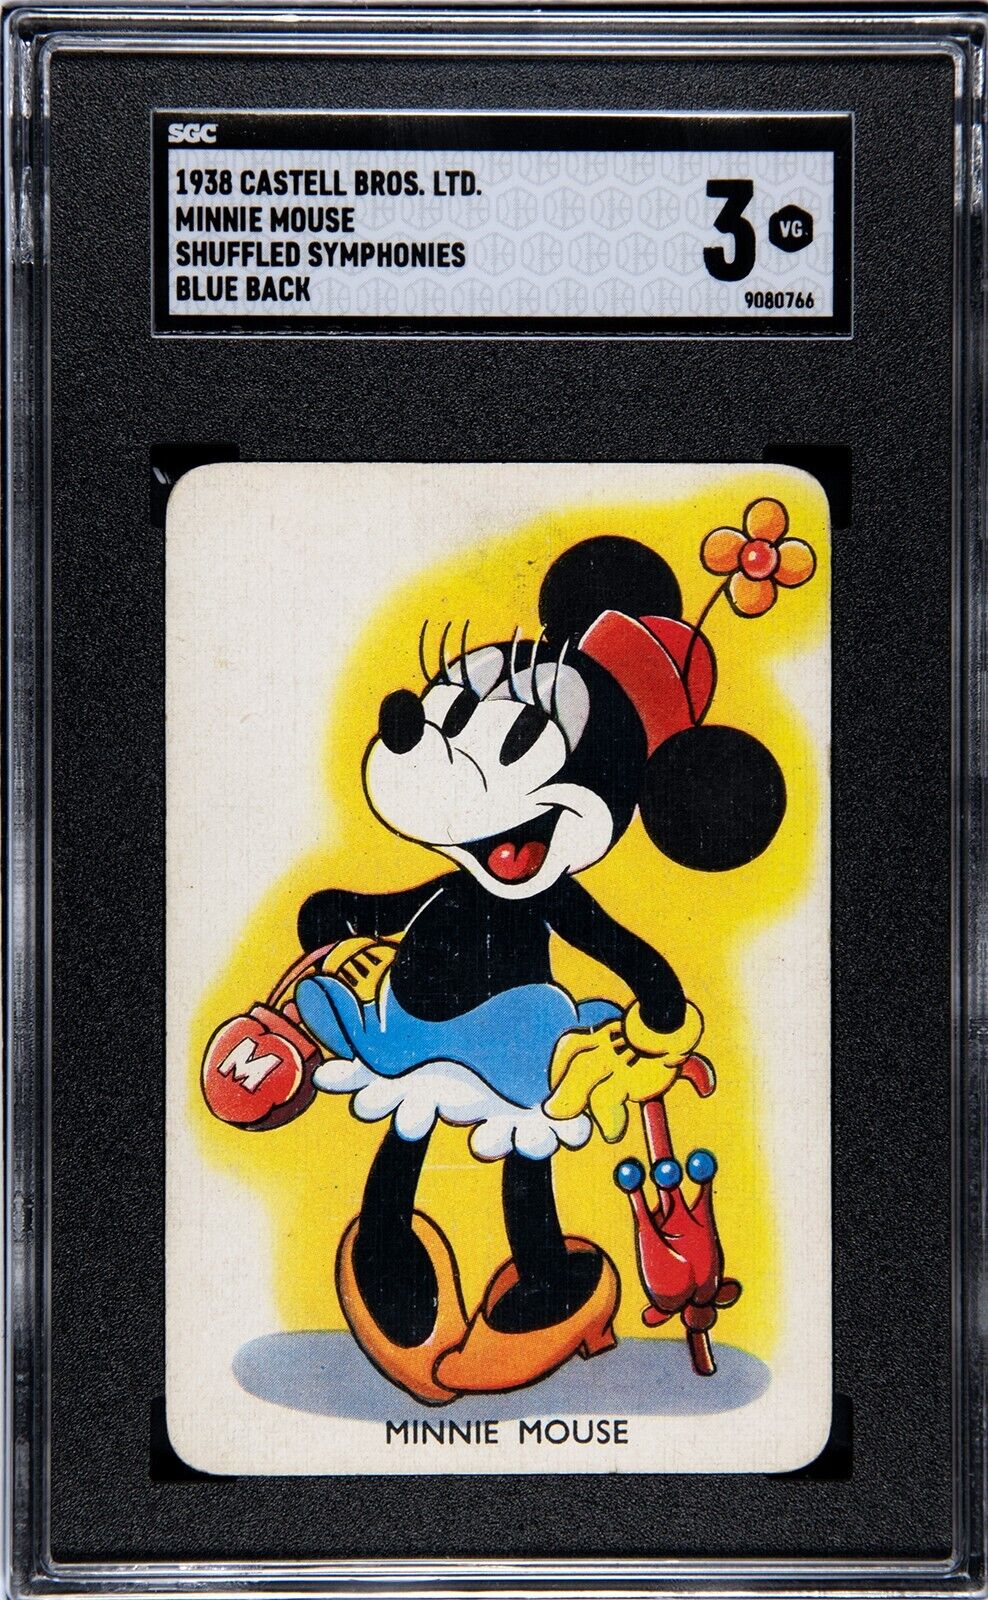 1938 Disney Castell Brothers Shuffled Symphonies Blue Back Minnie Mouse SGC 3